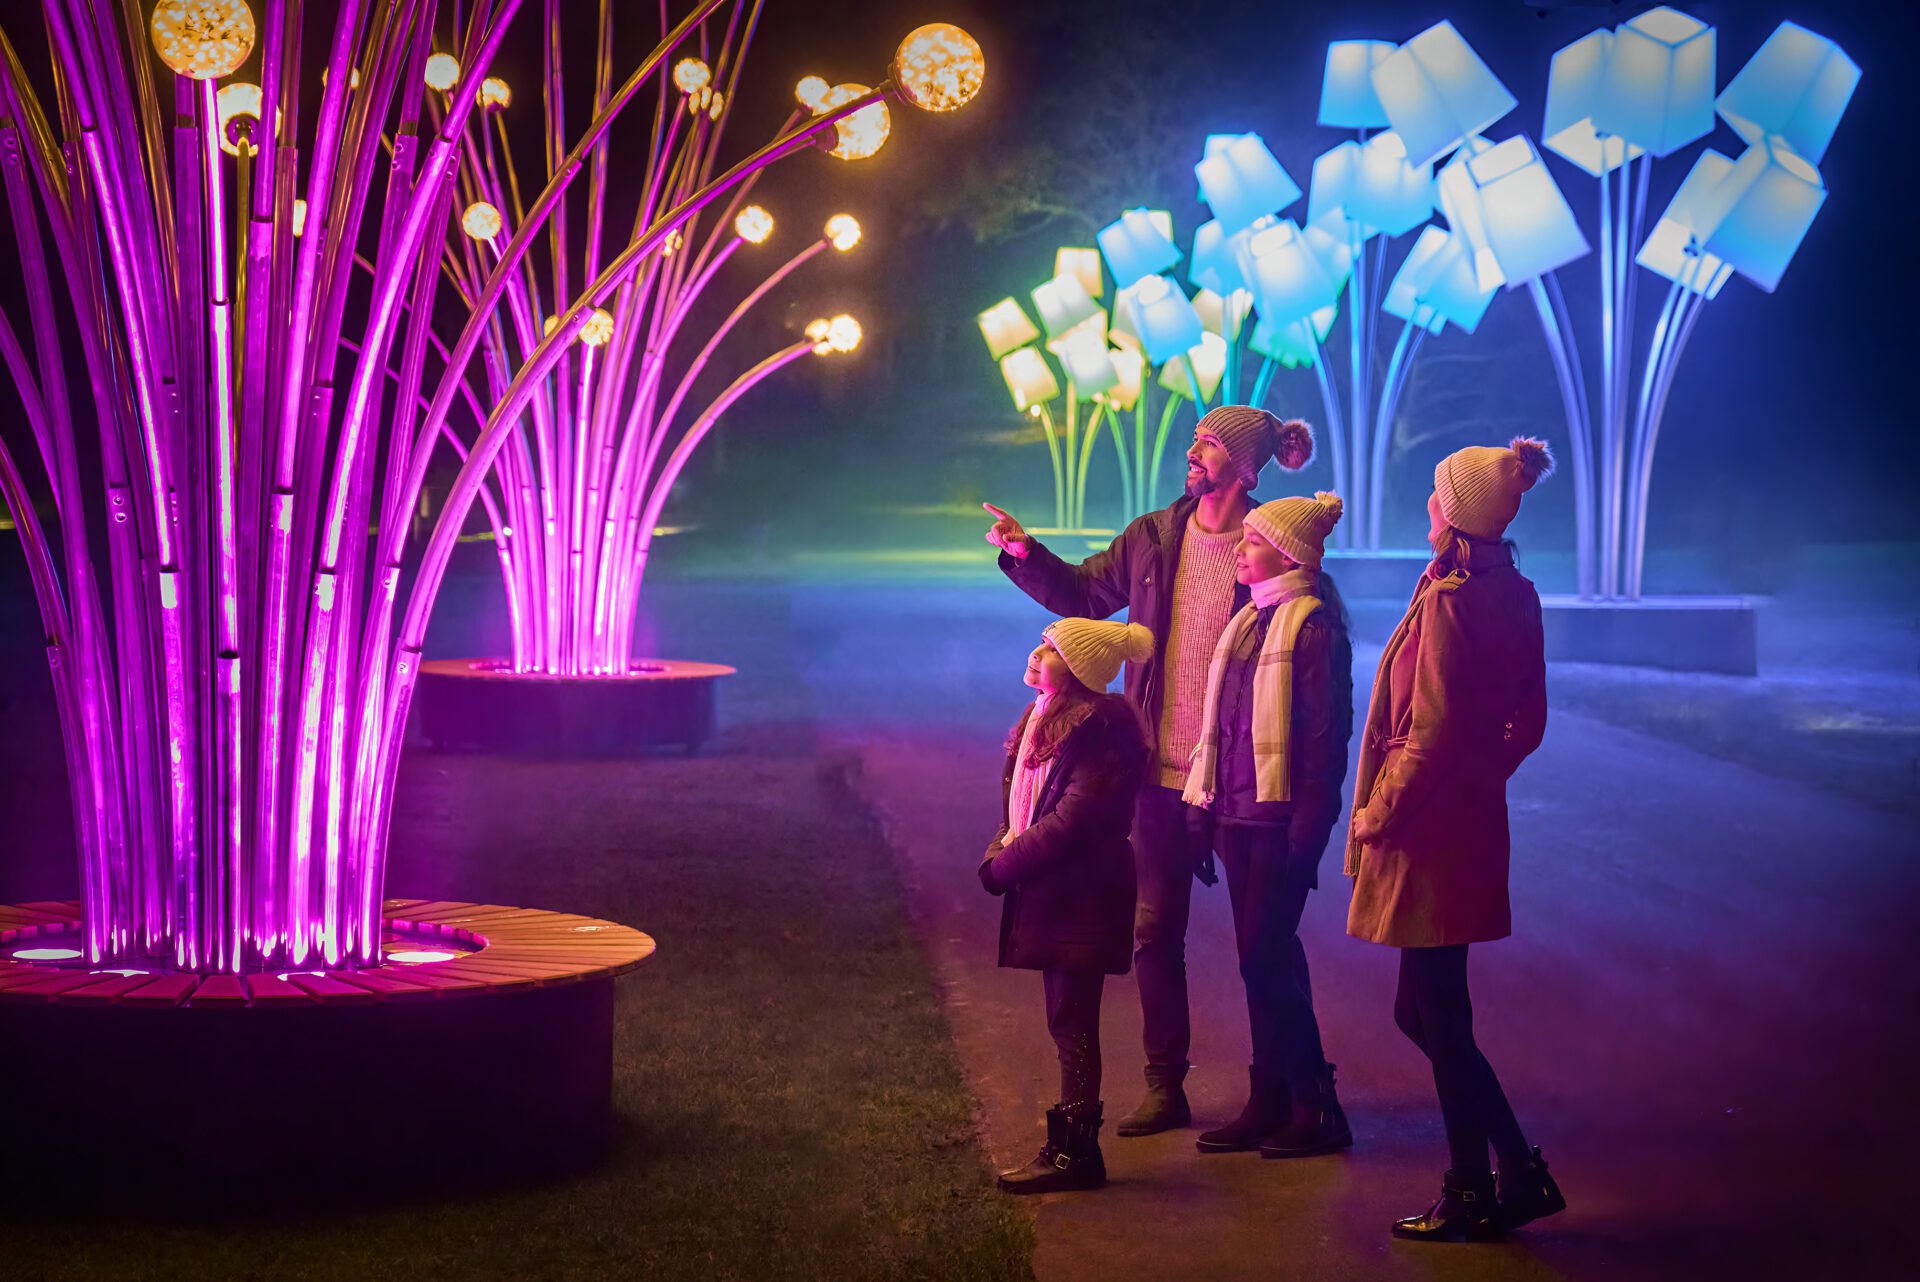 Family admiring the lights installation at Leeds Castle